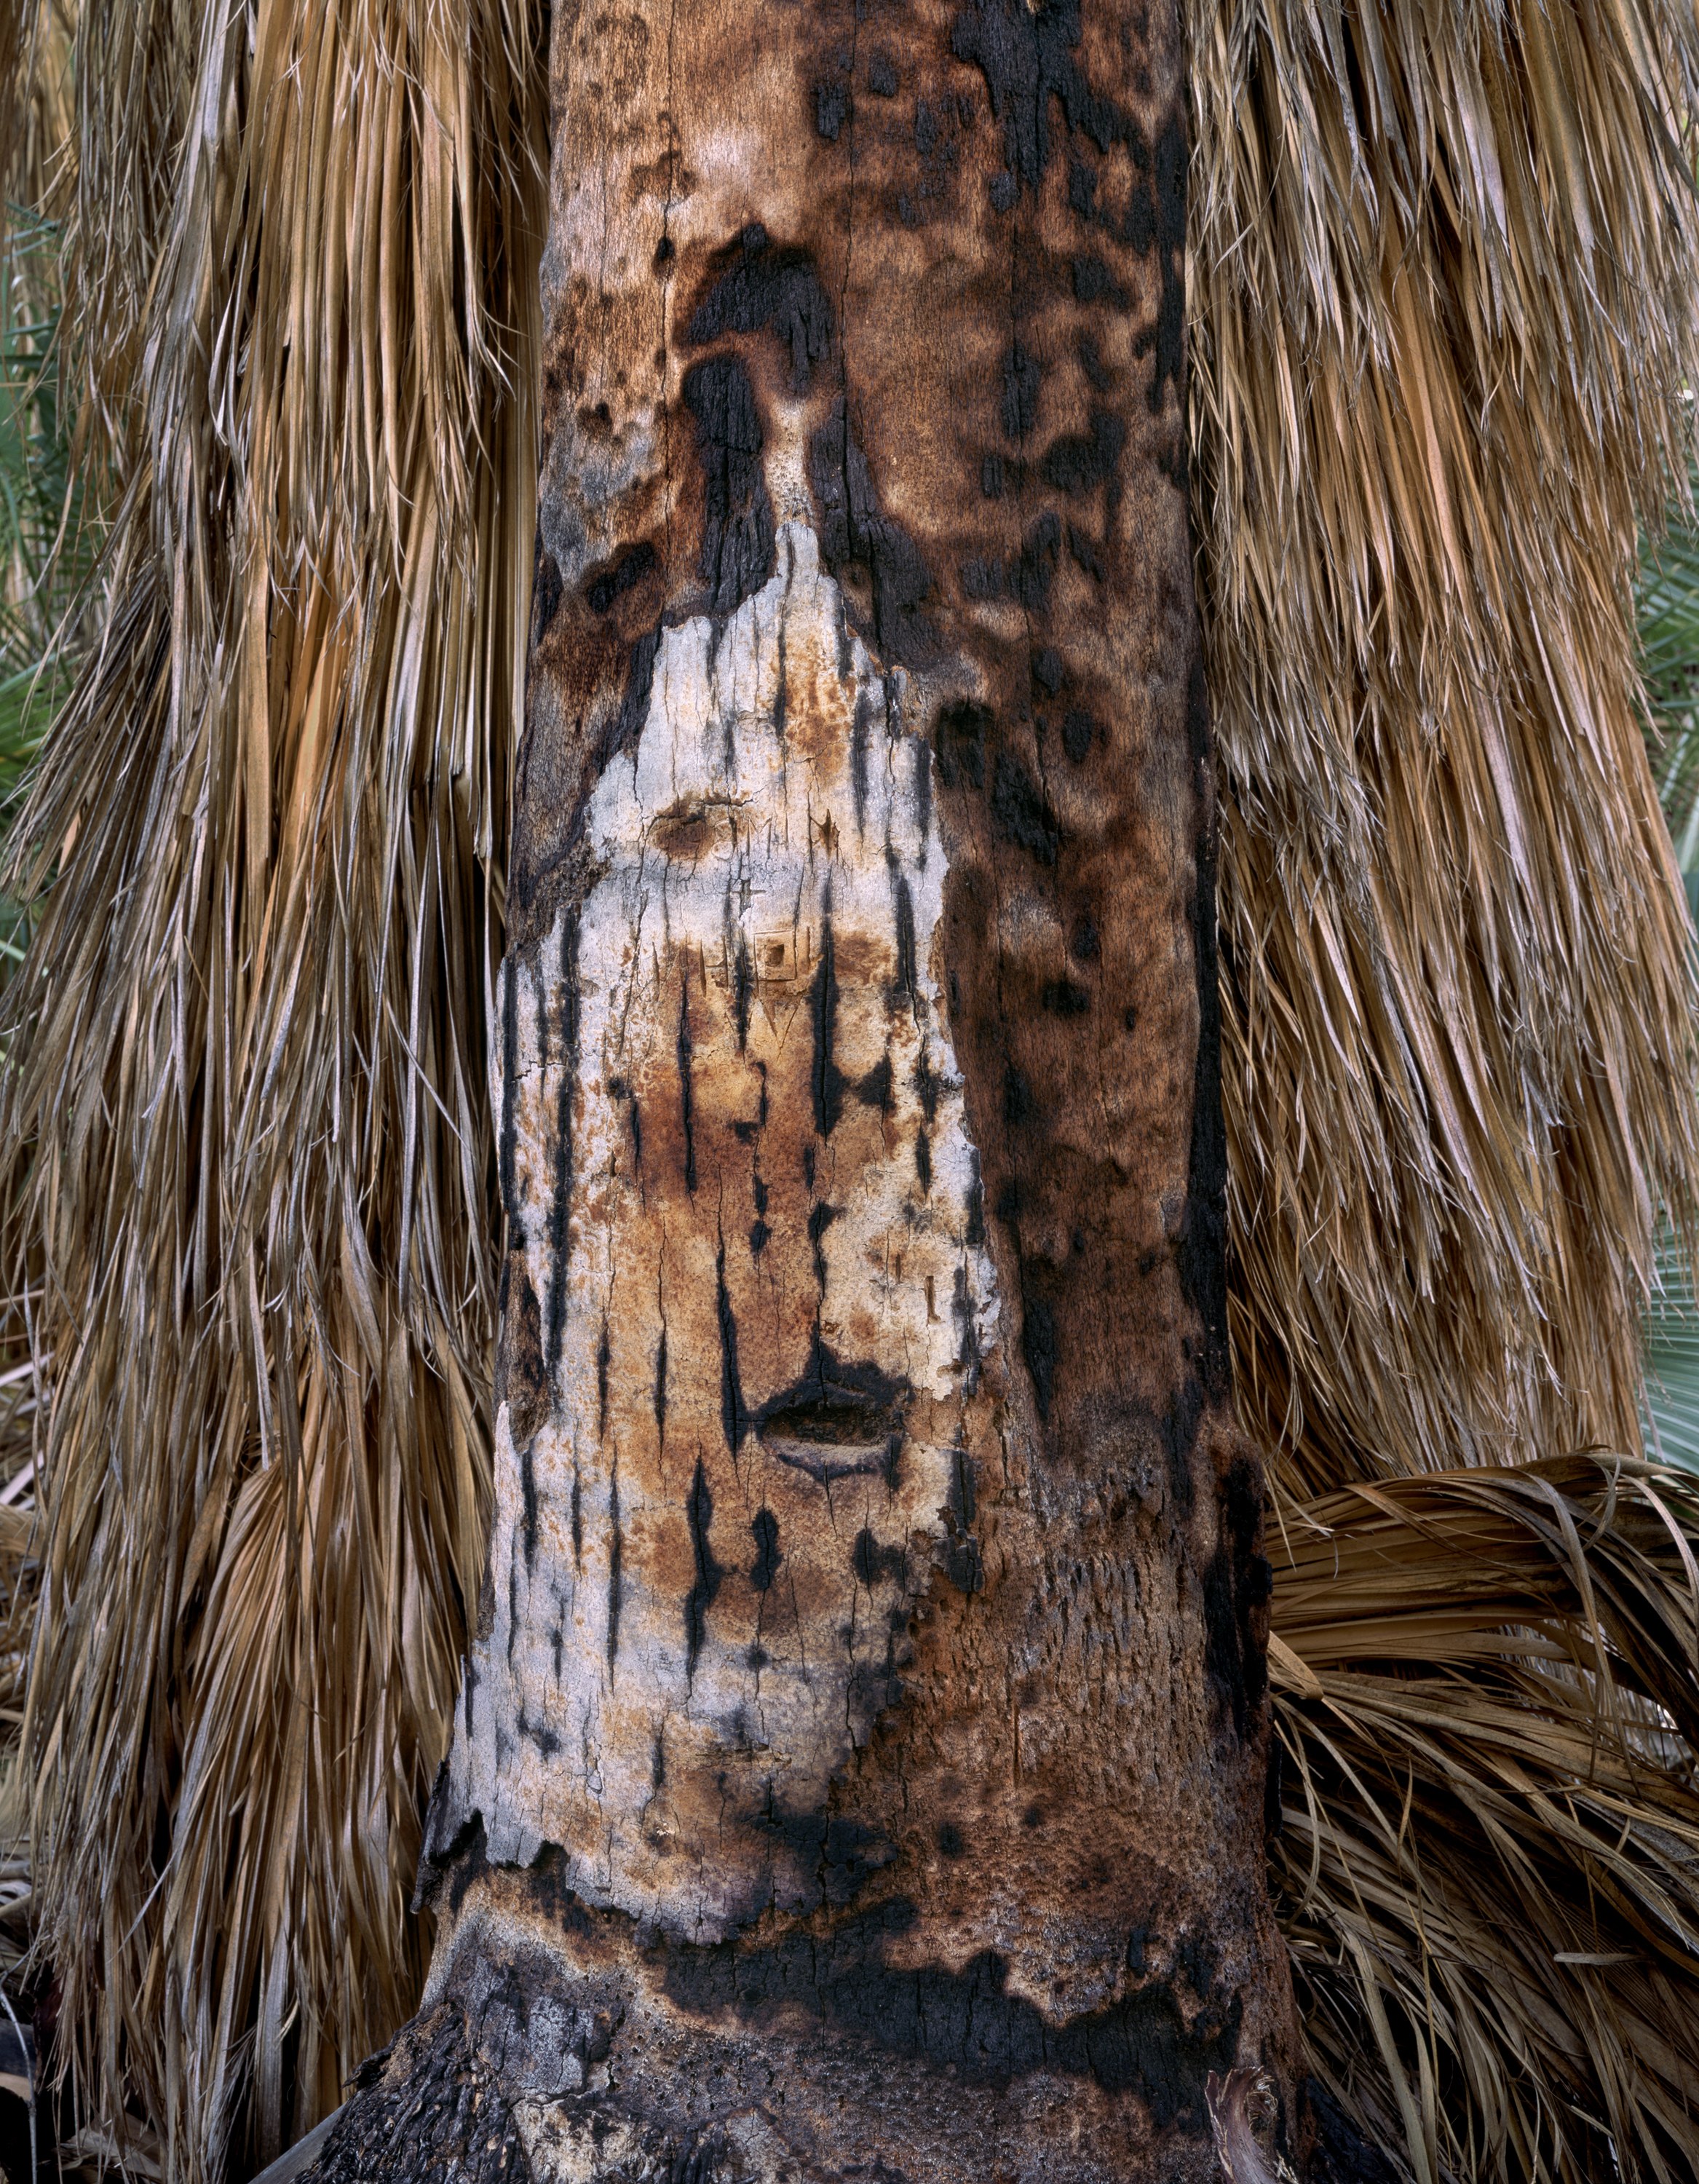 Scorched Trunk, Palm Canyon, near Palm Springs, California